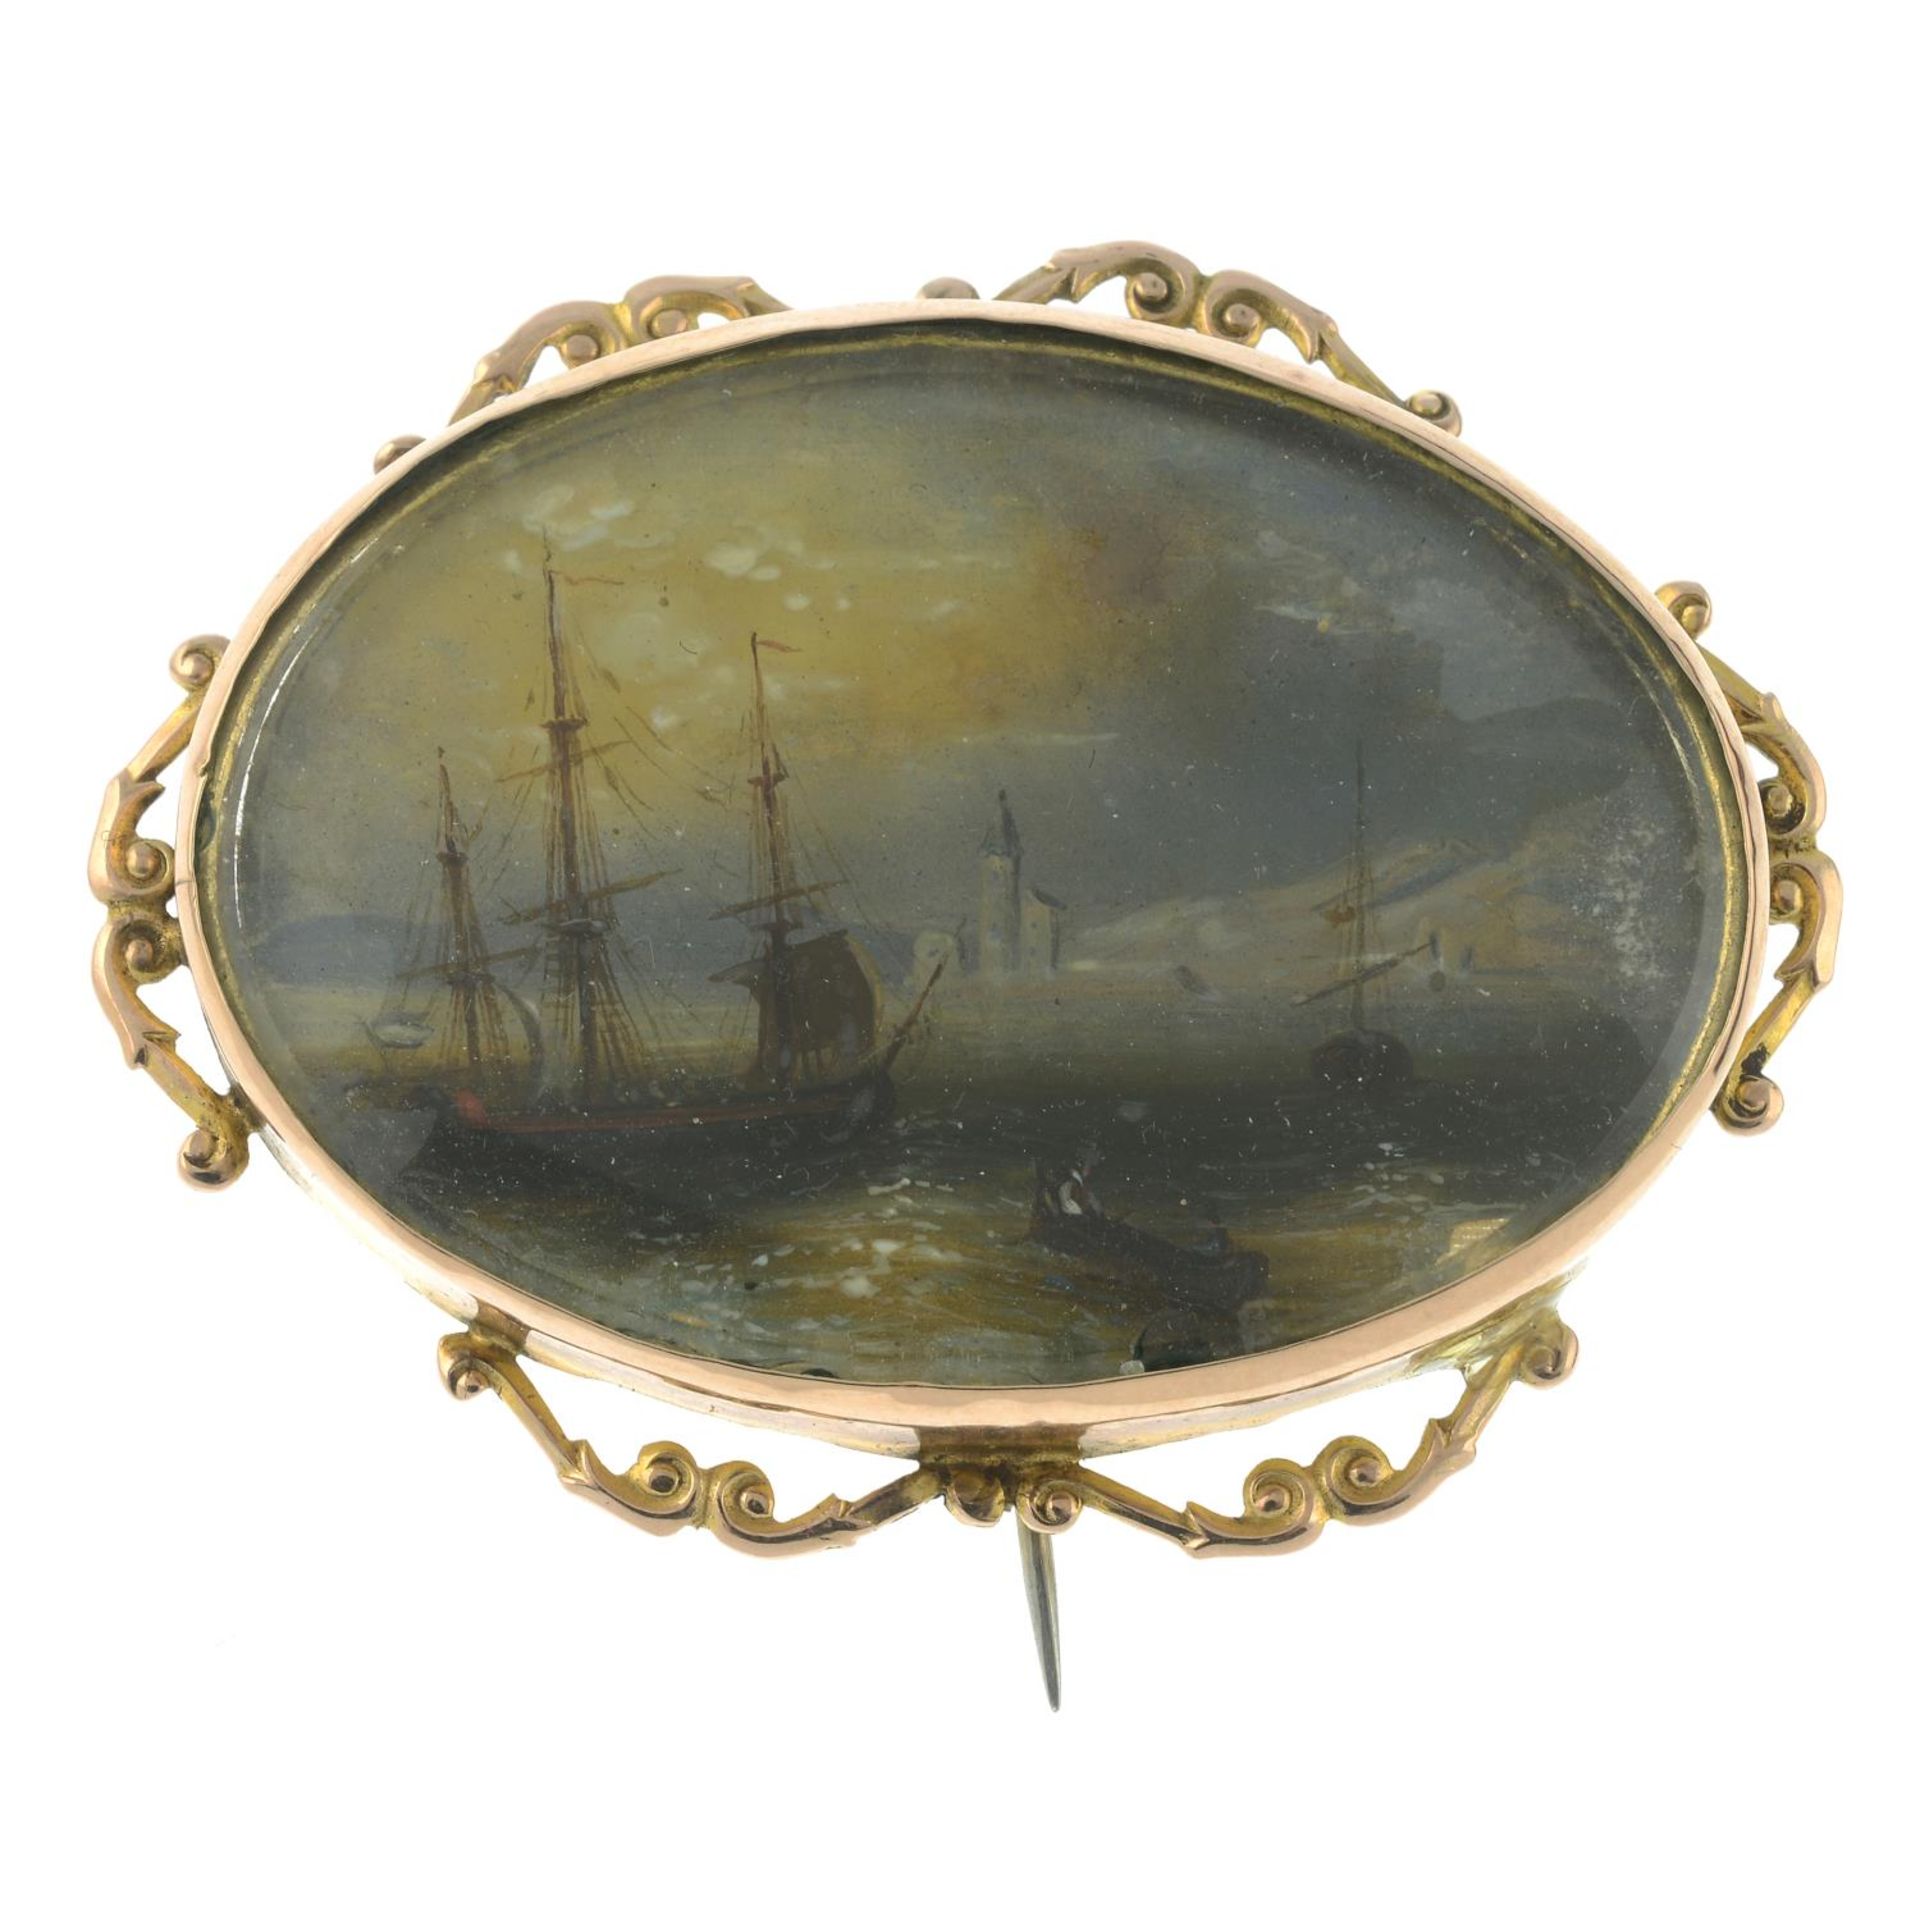 A late 19th century gold mounted brooch, with painted sailing scene, behind glass.Length 5.3cms.